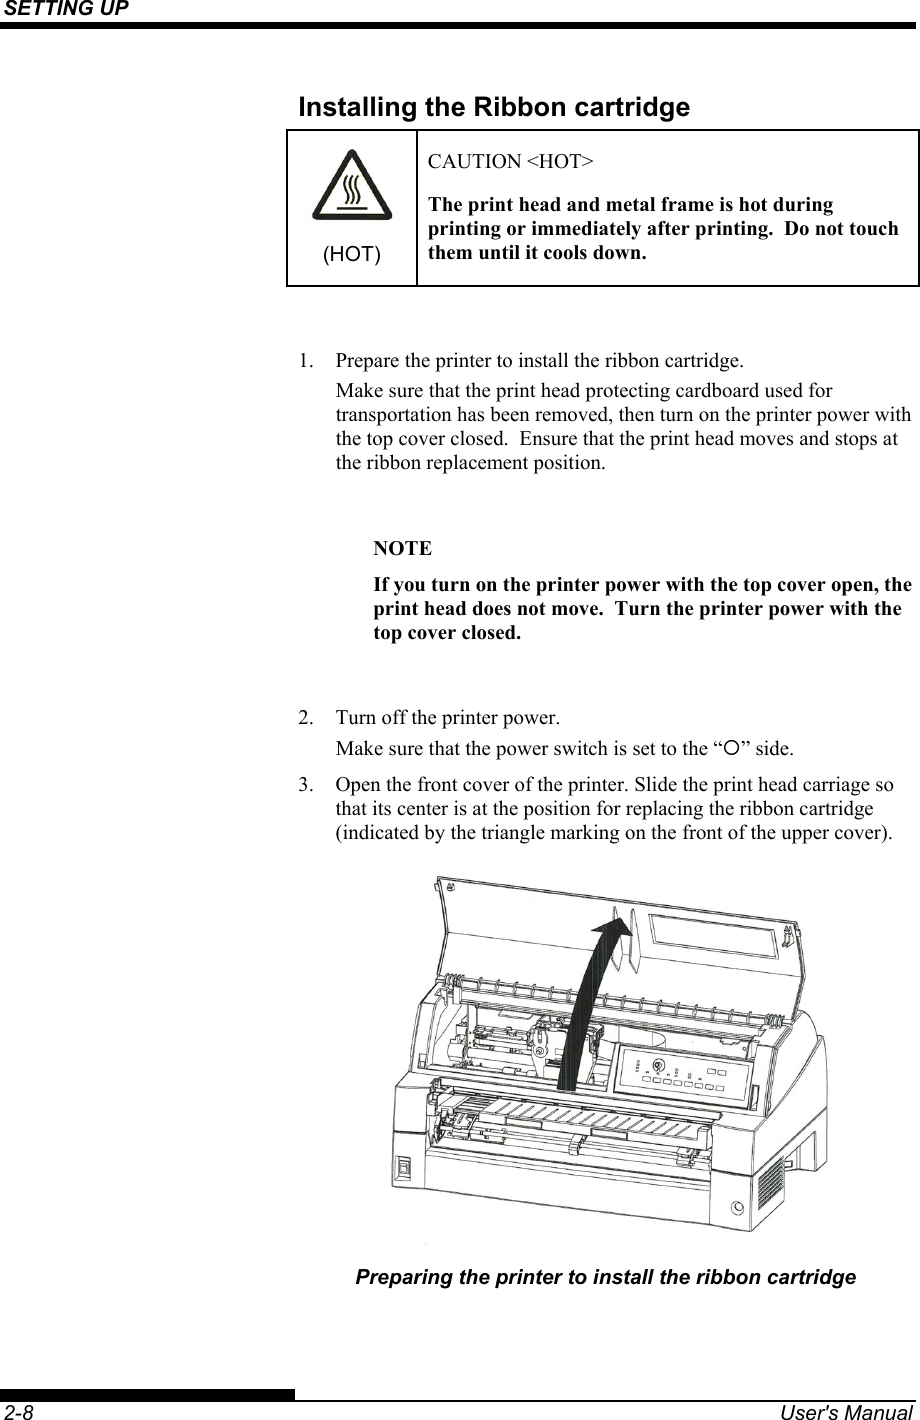 SETTING UP    2-8  User&apos;s Manual Installing the Ribbon cartridge  (HOT) CAUTION &lt;HOT&gt; The print head and metal frame is hot during printing or immediately after printing.  Do not touch them until it cools down.  1.  Prepare the printer to install the ribbon cartridge. Make sure that the print head protecting cardboard used for transportation has been removed, then turn on the printer power with the top cover closed.  Ensure that the print head moves and stops at the ribbon replacement position.  NOTE If you turn on the printer power with the top cover open, the print head does not move.  Turn the printer power with the top cover closed.  2.  Turn off the printer power. Make sure that the power switch is set to the “{” side. 3.  Open the front cover of the printer. Slide the print head carriage so that its center is at the position for replacing the ribbon cartridge (indicated by the triangle marking on the front of the upper cover).  Preparing the printer to install the ribbon cartridge 